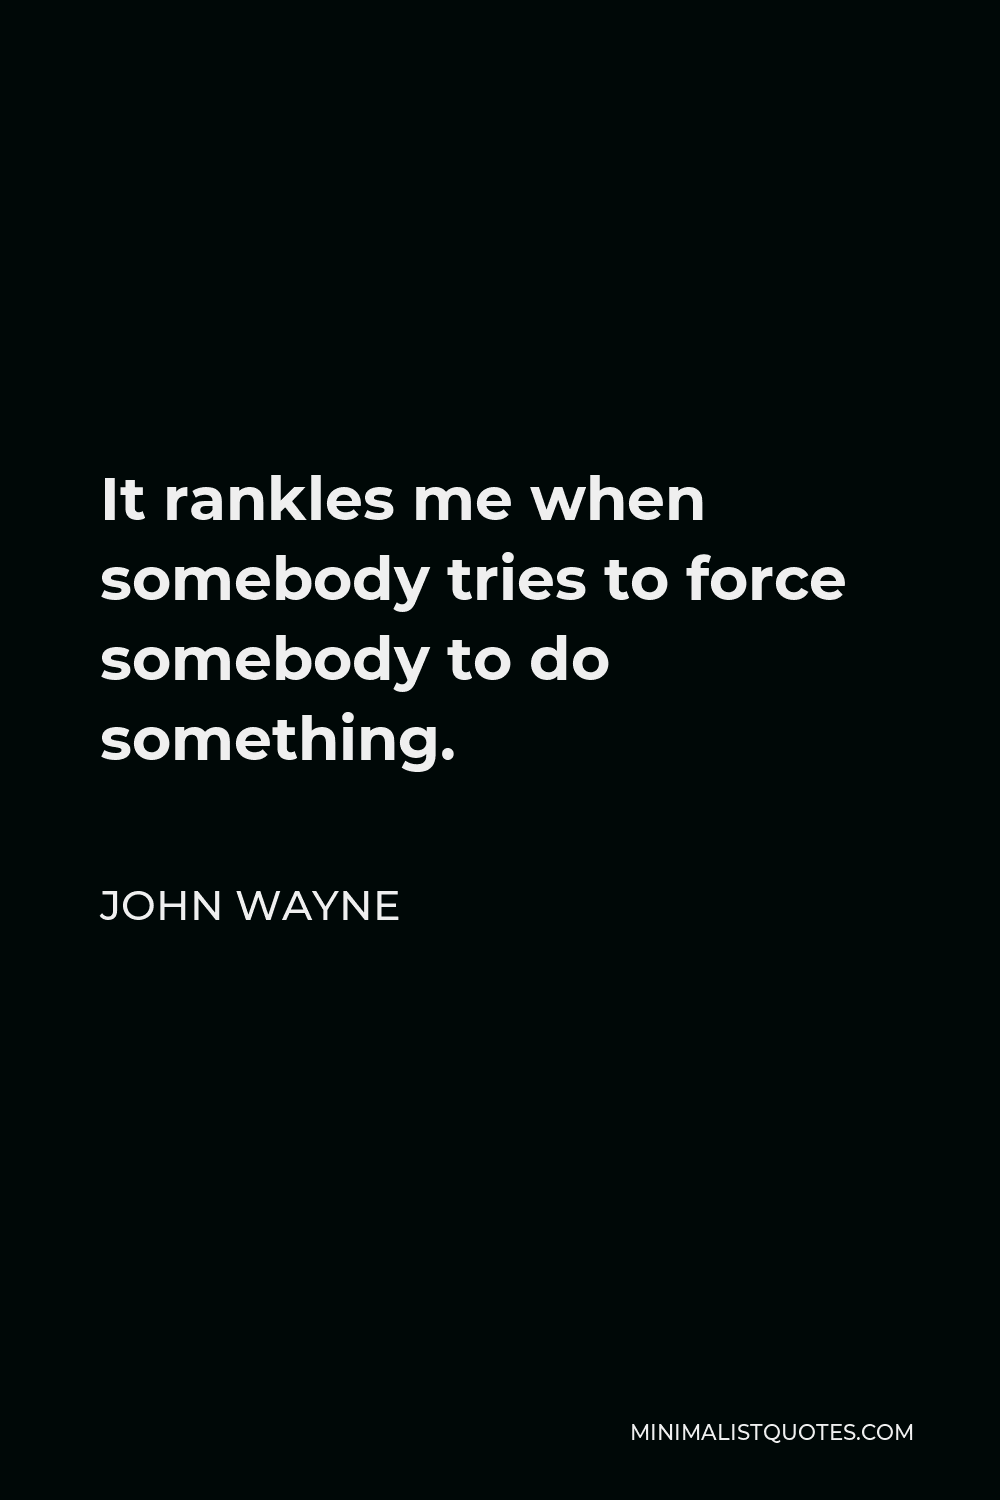 John Wayne Quote - It rankles me when somebody tries to force somebody to do something.